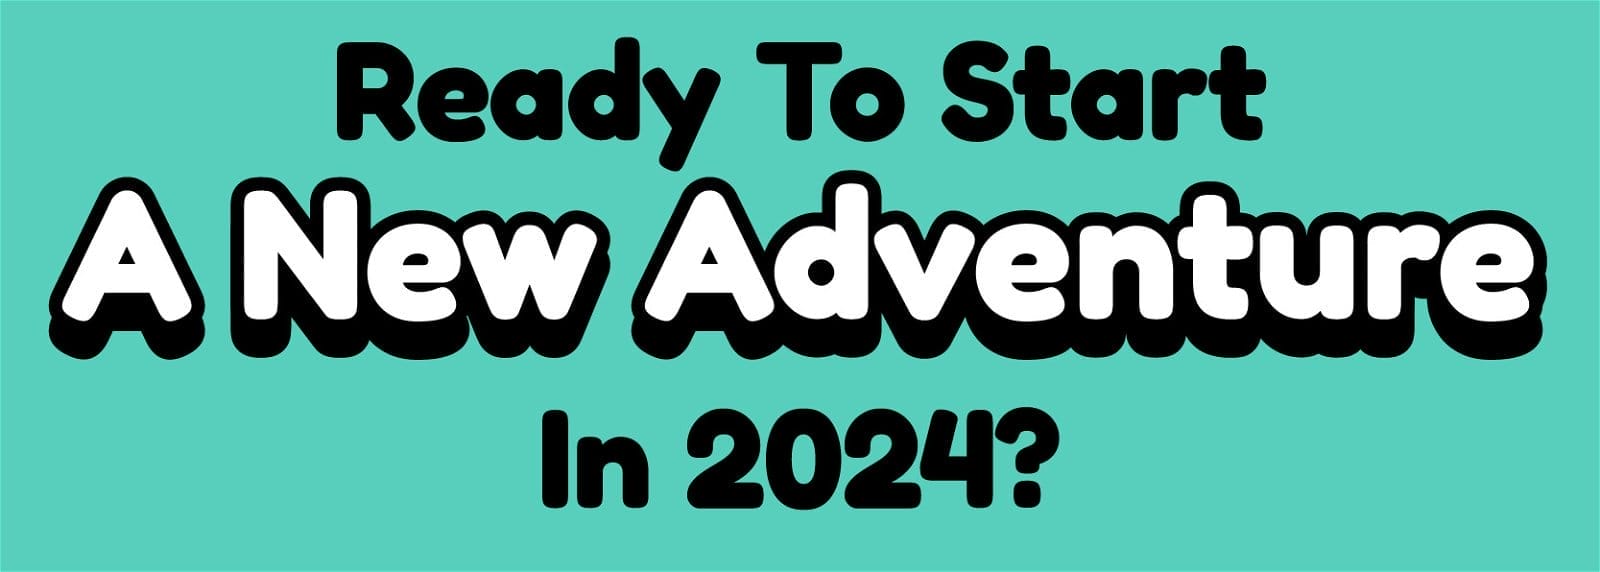 Ready To Start A New Adventure In 2024?